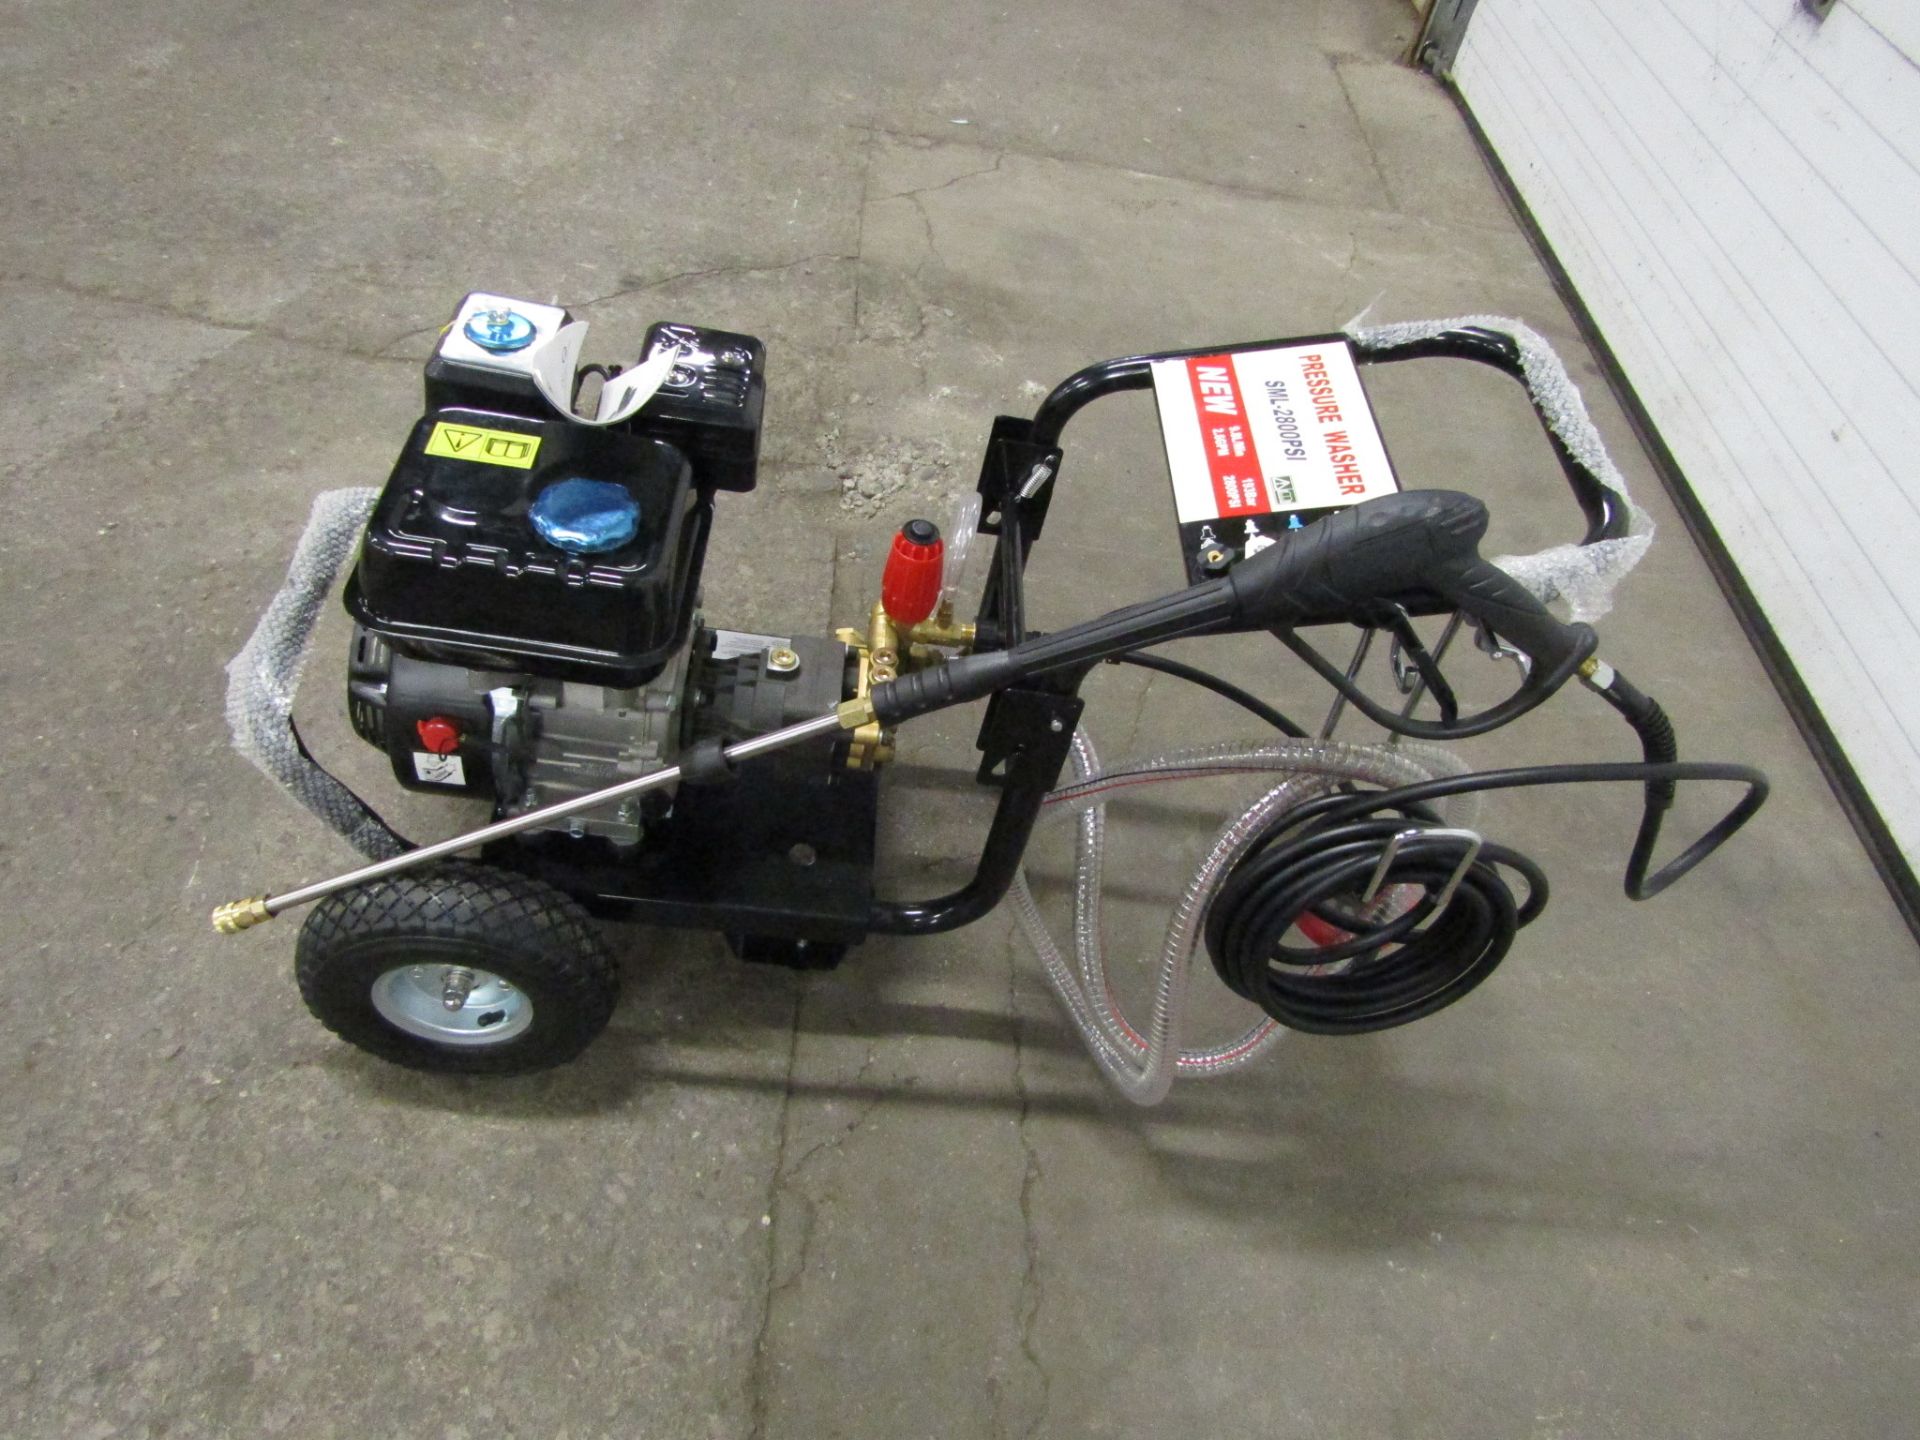 Brand New Pressure Power Washer - Gas Powered Unit 2800PSI - Variable Speed 2.6GPM with various